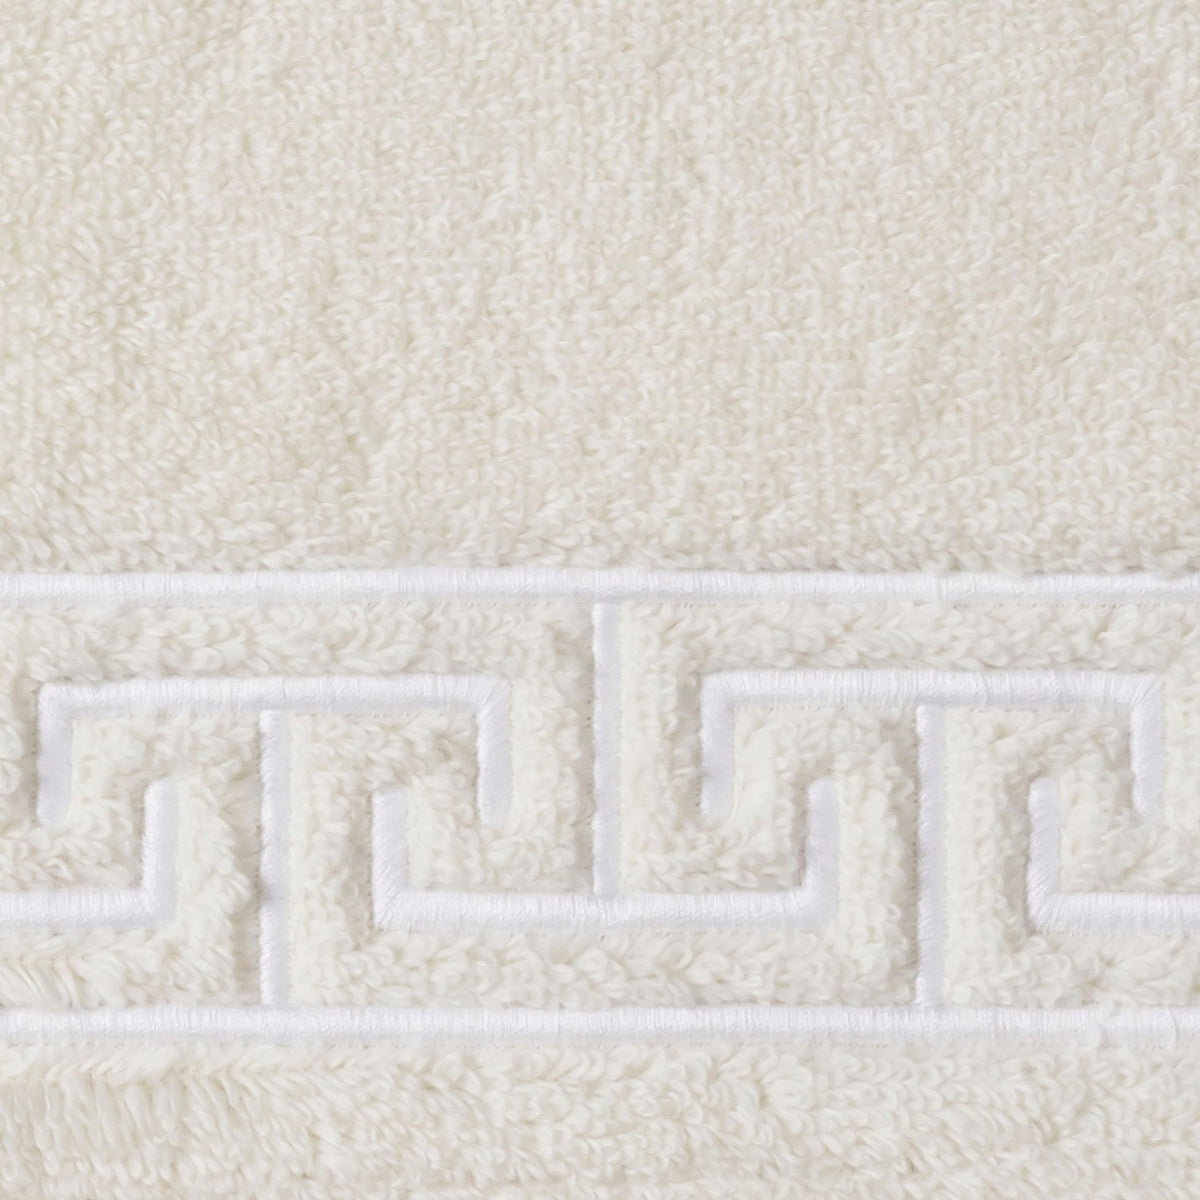 Swatch of Matouk Adelphi Bath Towels in Color Ivory